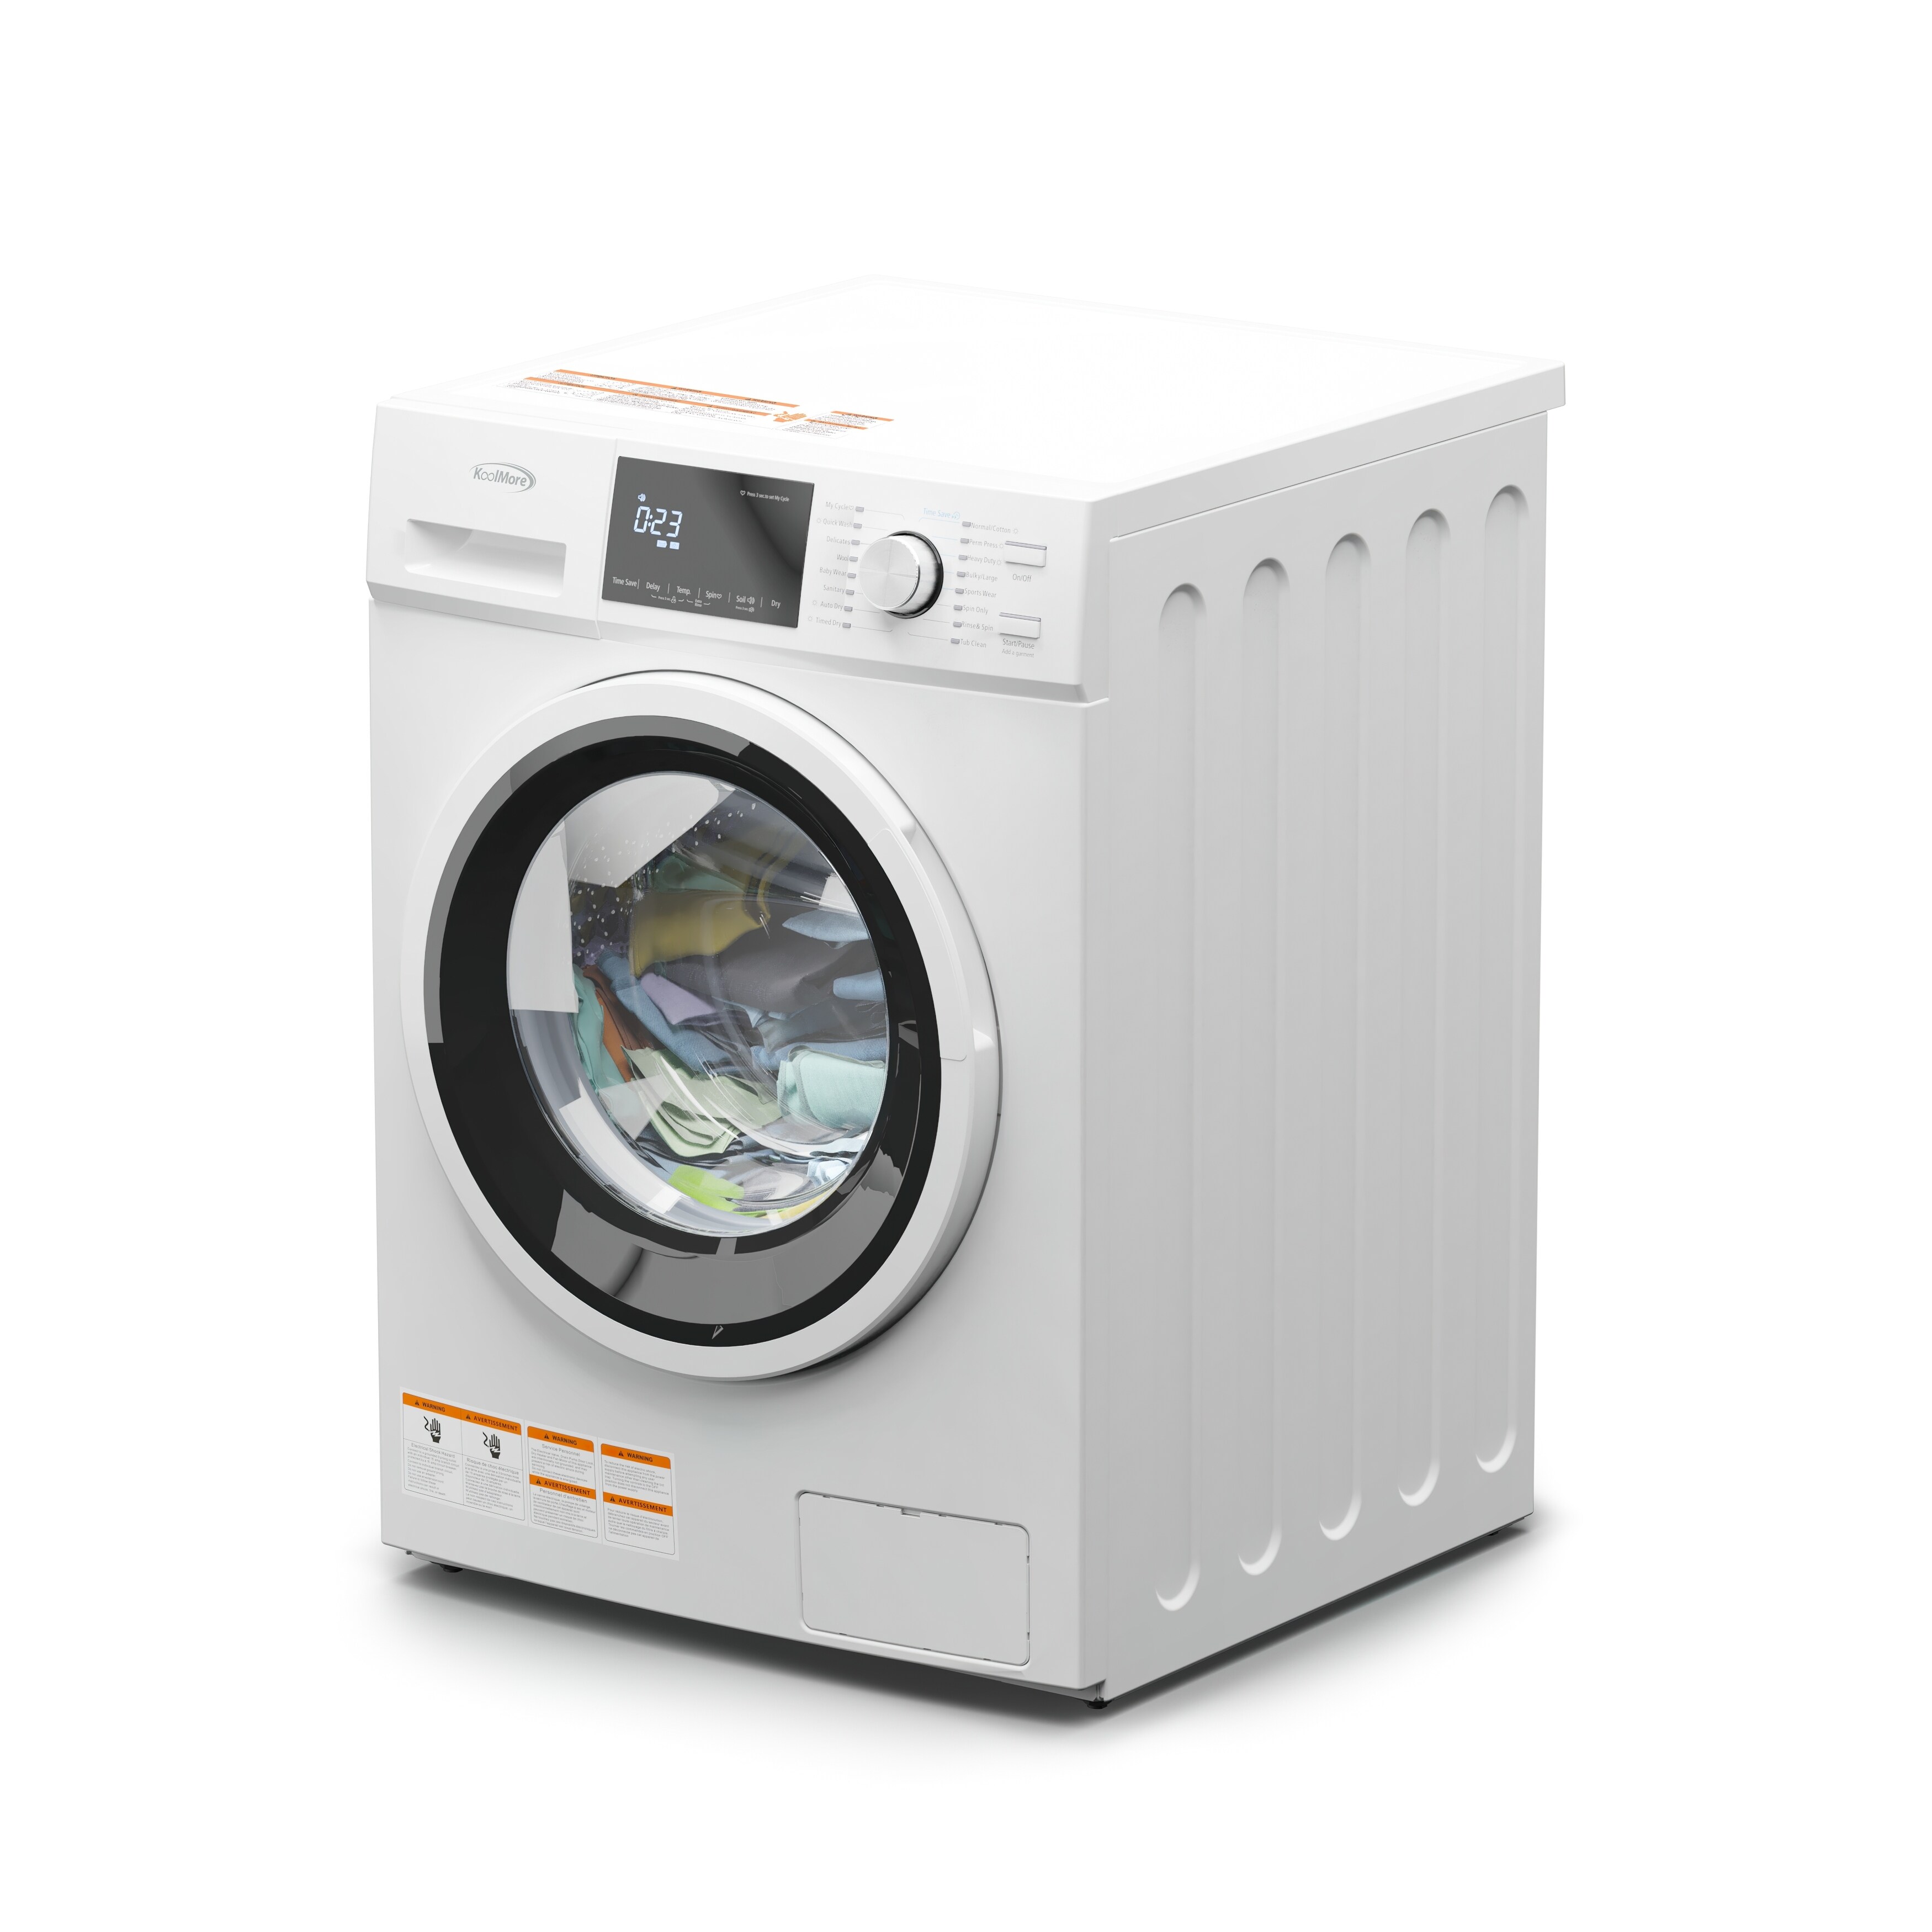 Full-Automatic Washing Machine 1.5 Cu. ft 11 lbs Washer and Dryer -white